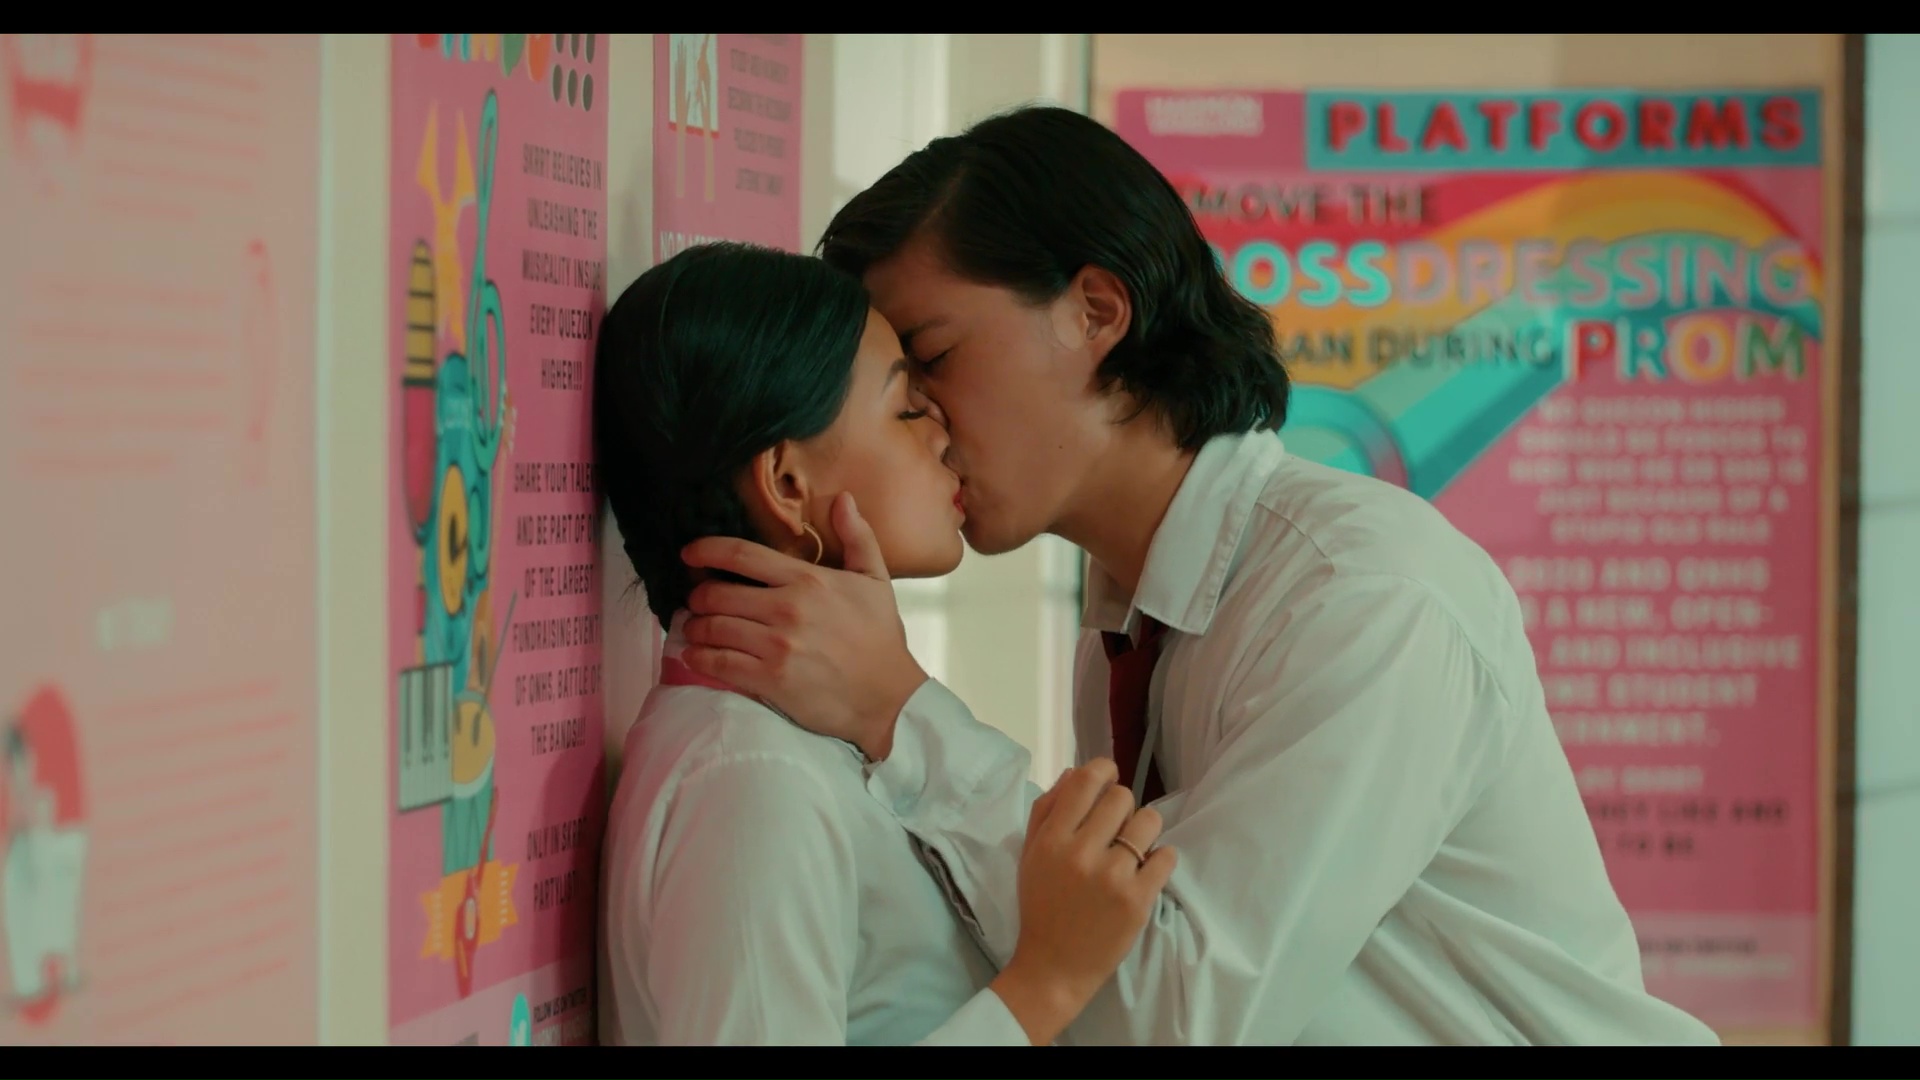 High (School) On Sex (2022) Filipino Season 01 [Episodes 08 Added] | x264 WEB-DL | 1080p | 720p | 480p | Download Adult Web Series | Watch Online | GDrive | Direct Links